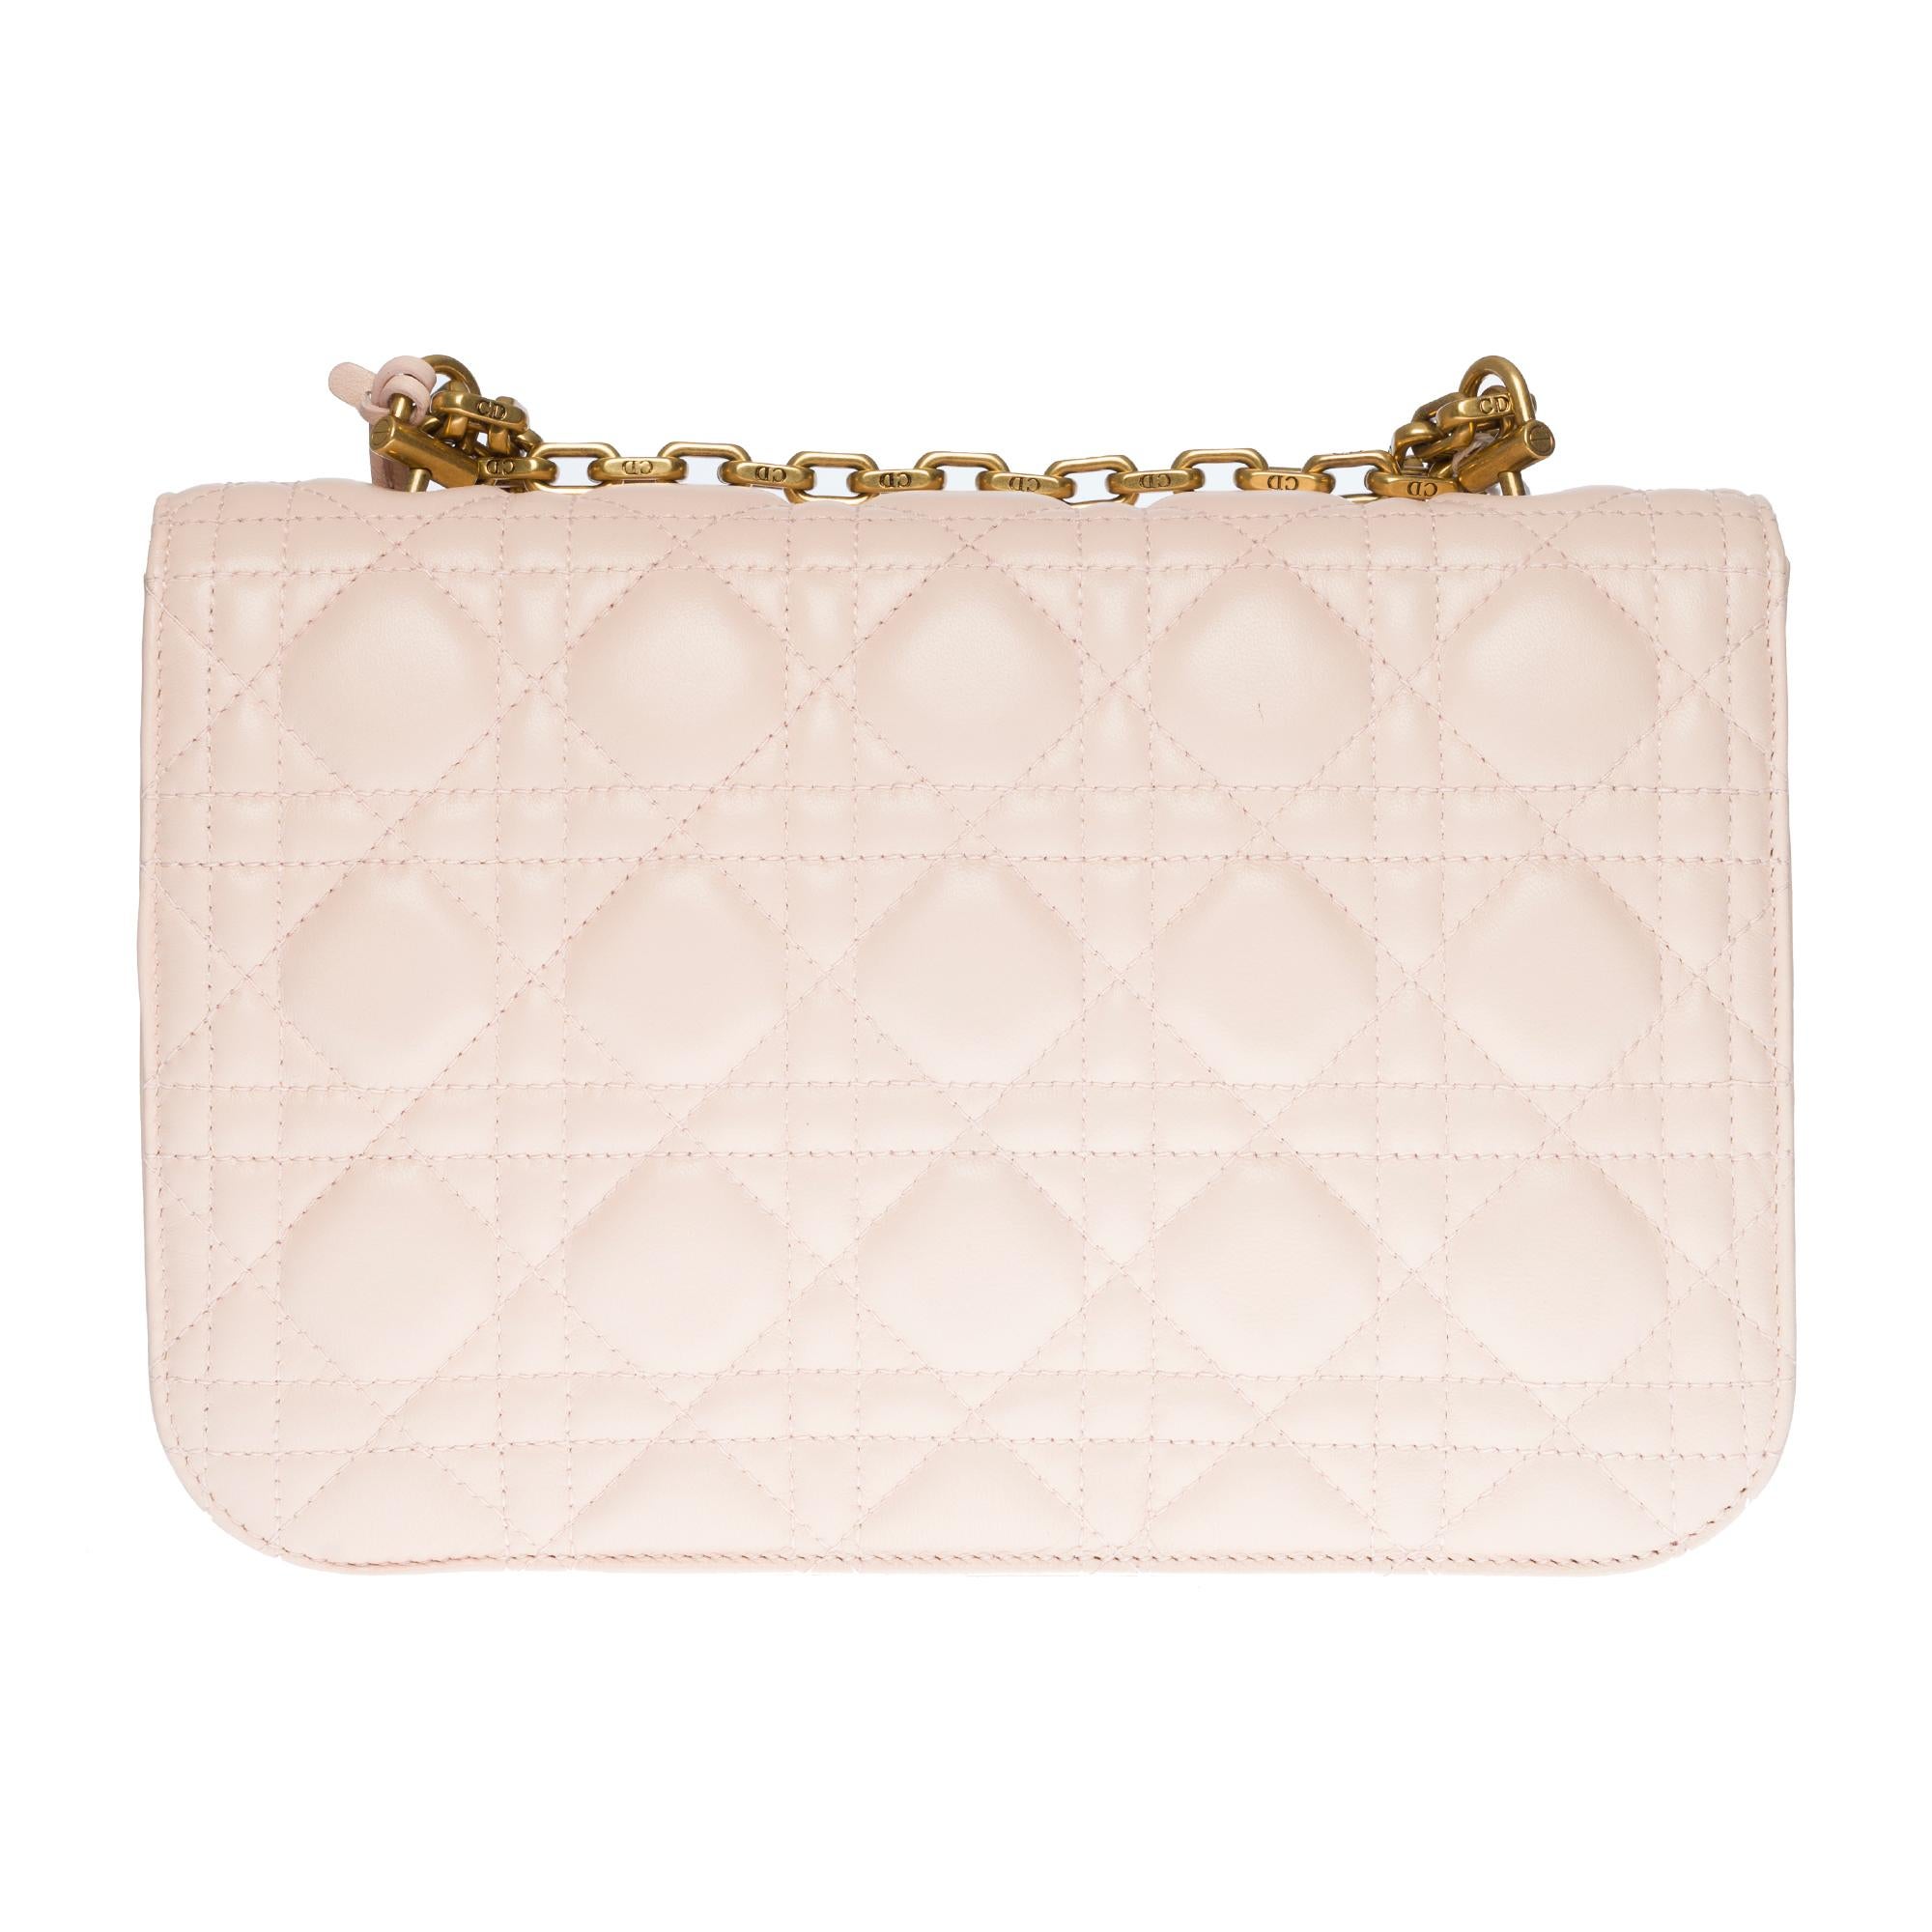 Elegant Dior Dioraddict shoulder bag in powder pink cannage leather, gold metal hardware, a chain handle transformable into gold metal allowing a hand or shoulder or shoulder strap.

Closure by flap.
Lining in pink suede, one zip pocket, one patch